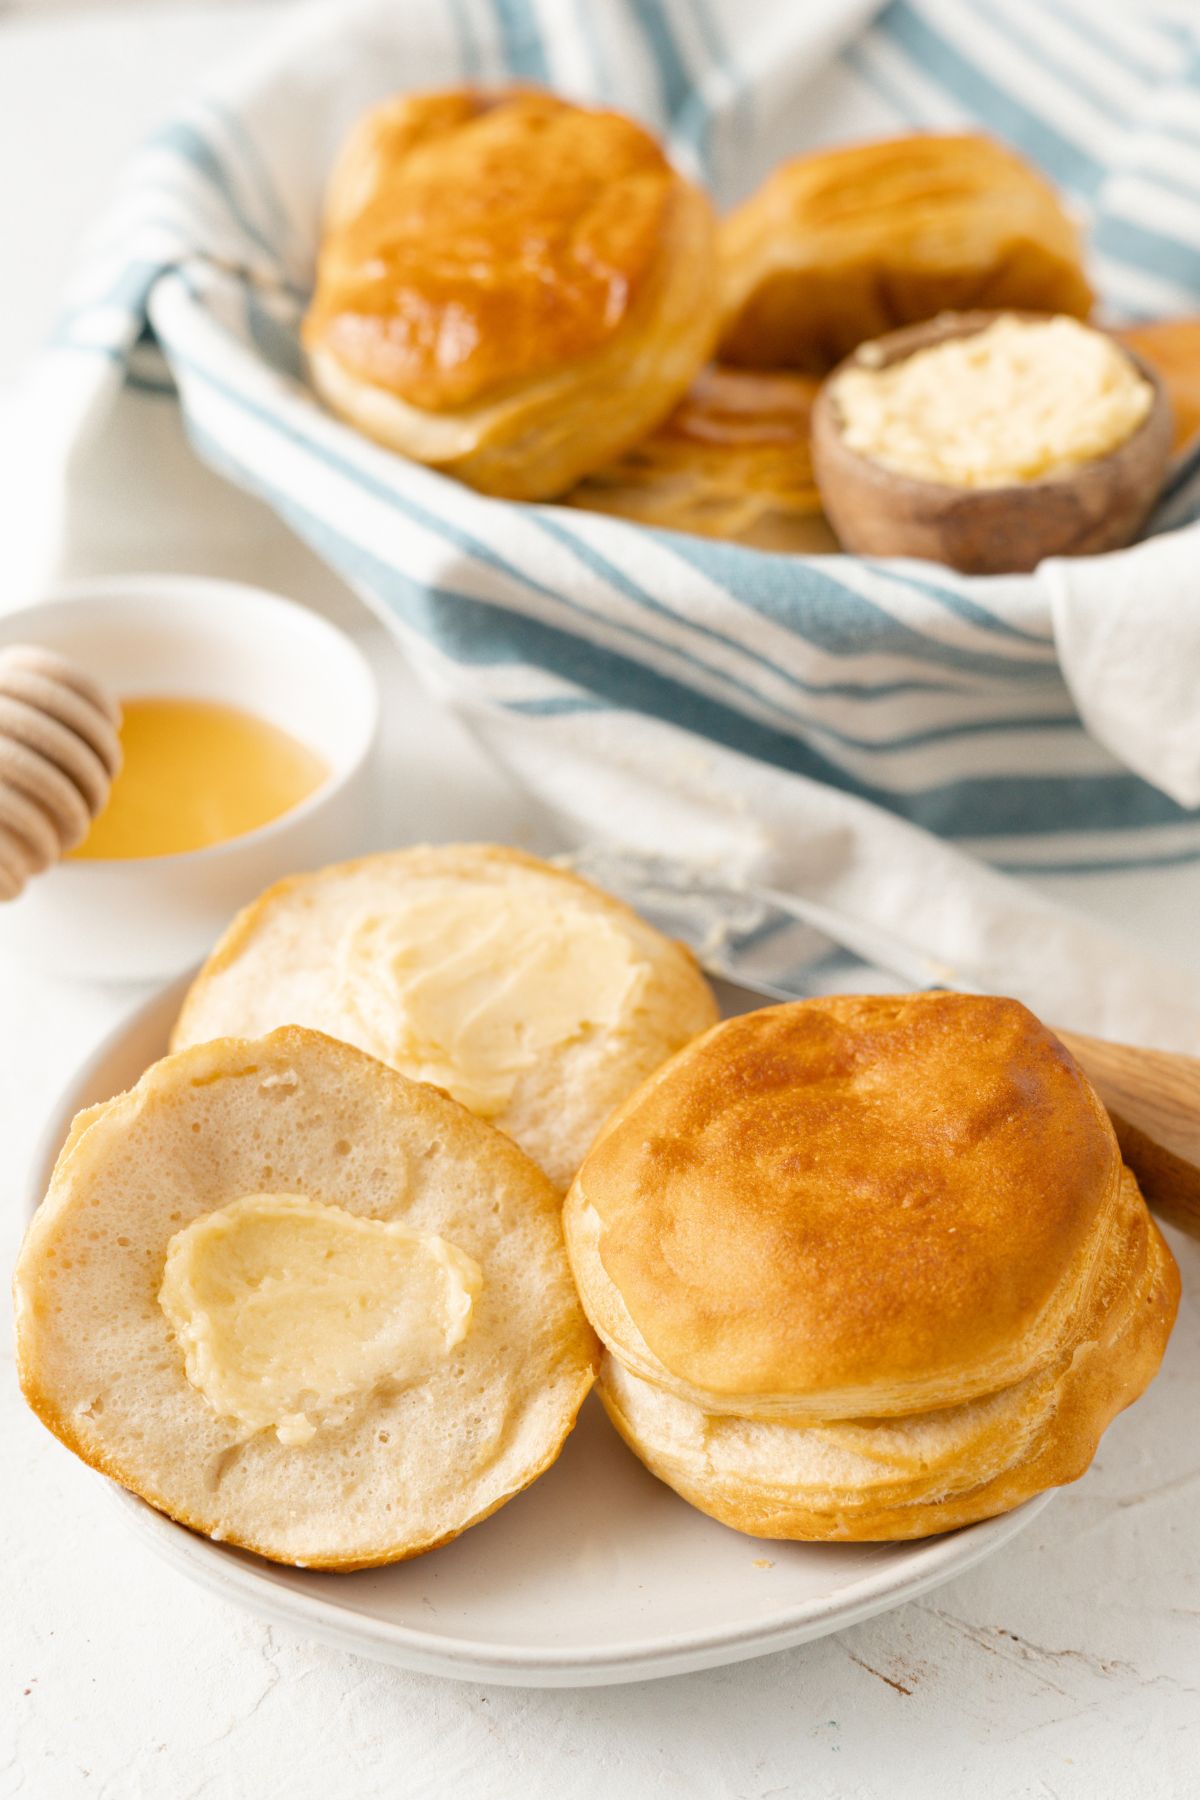 Pilsbury Grands Air Fryer Biscuits with melted whipped honey butter